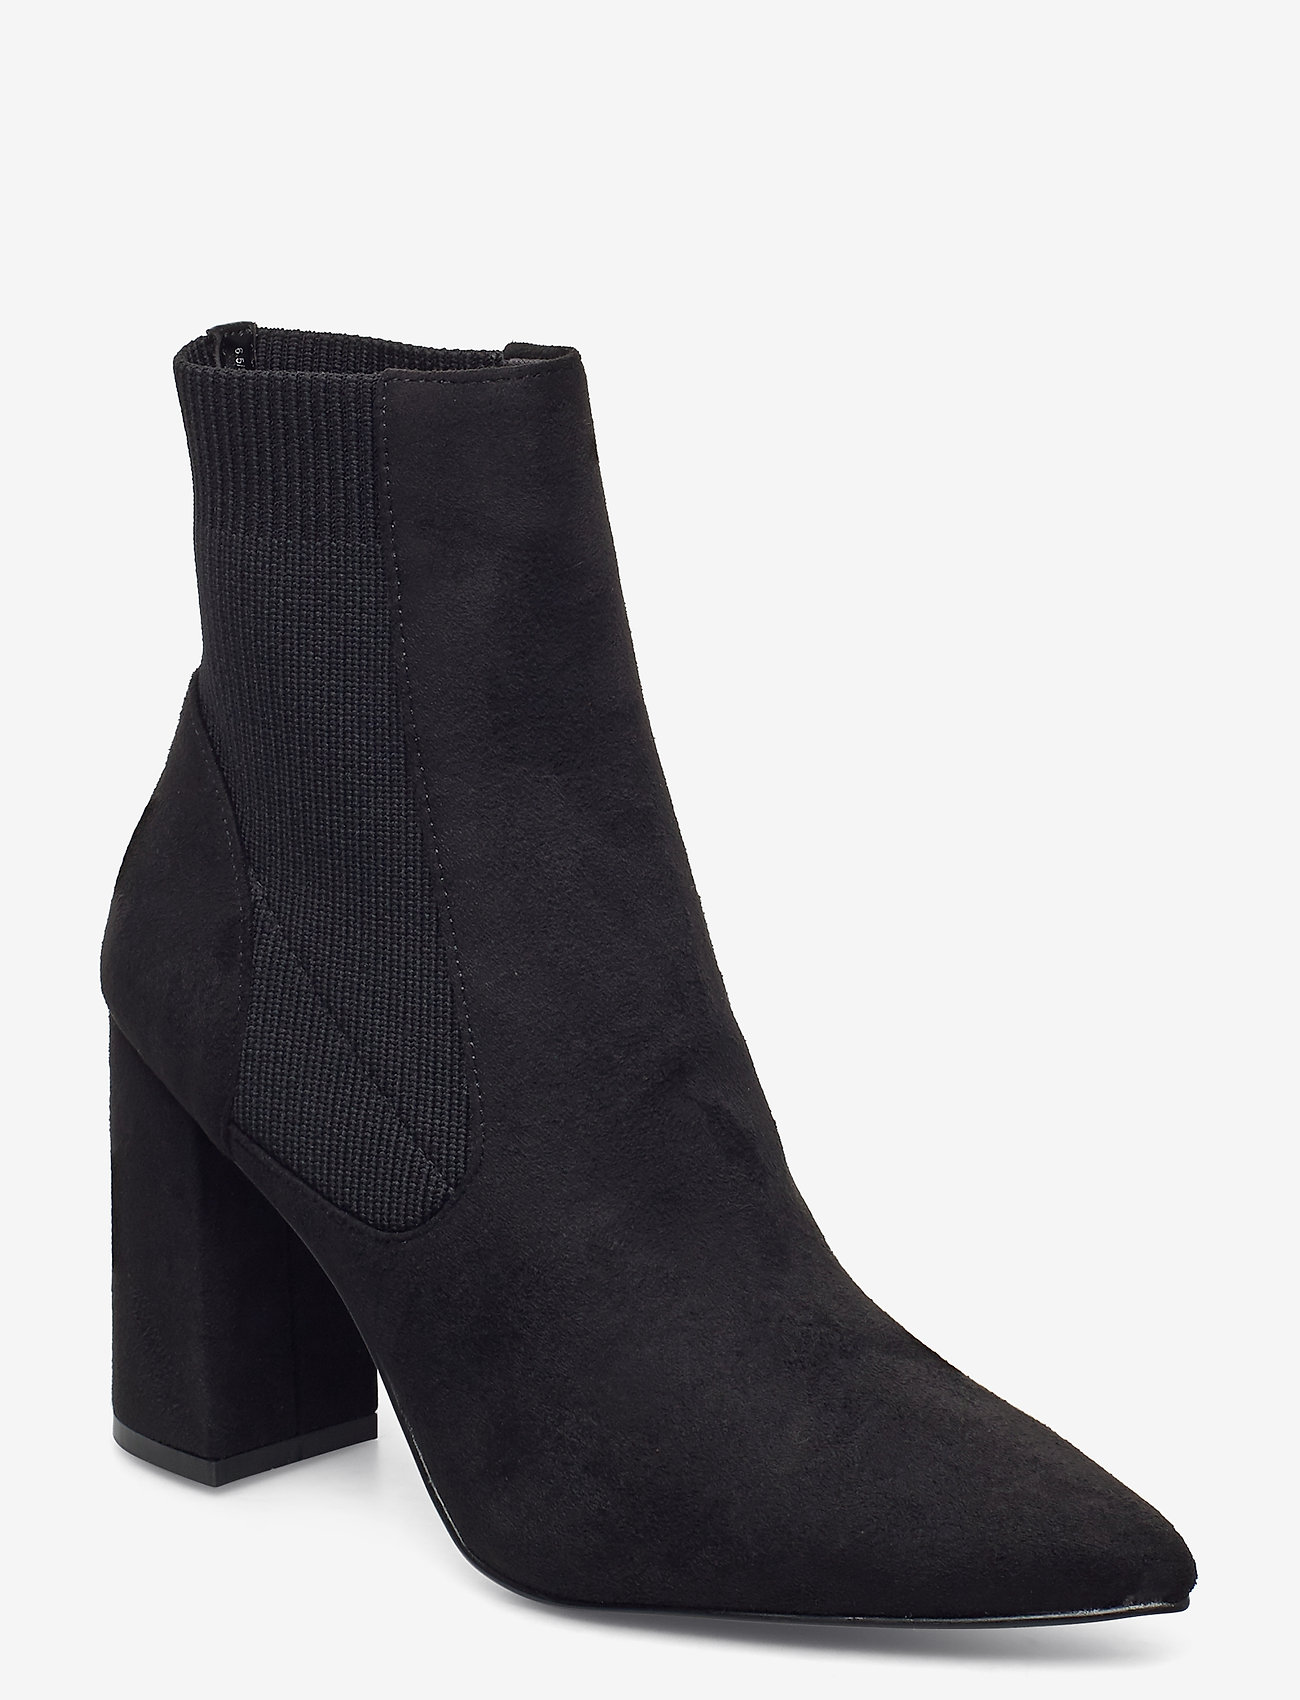 steve madden heeled ankle boots